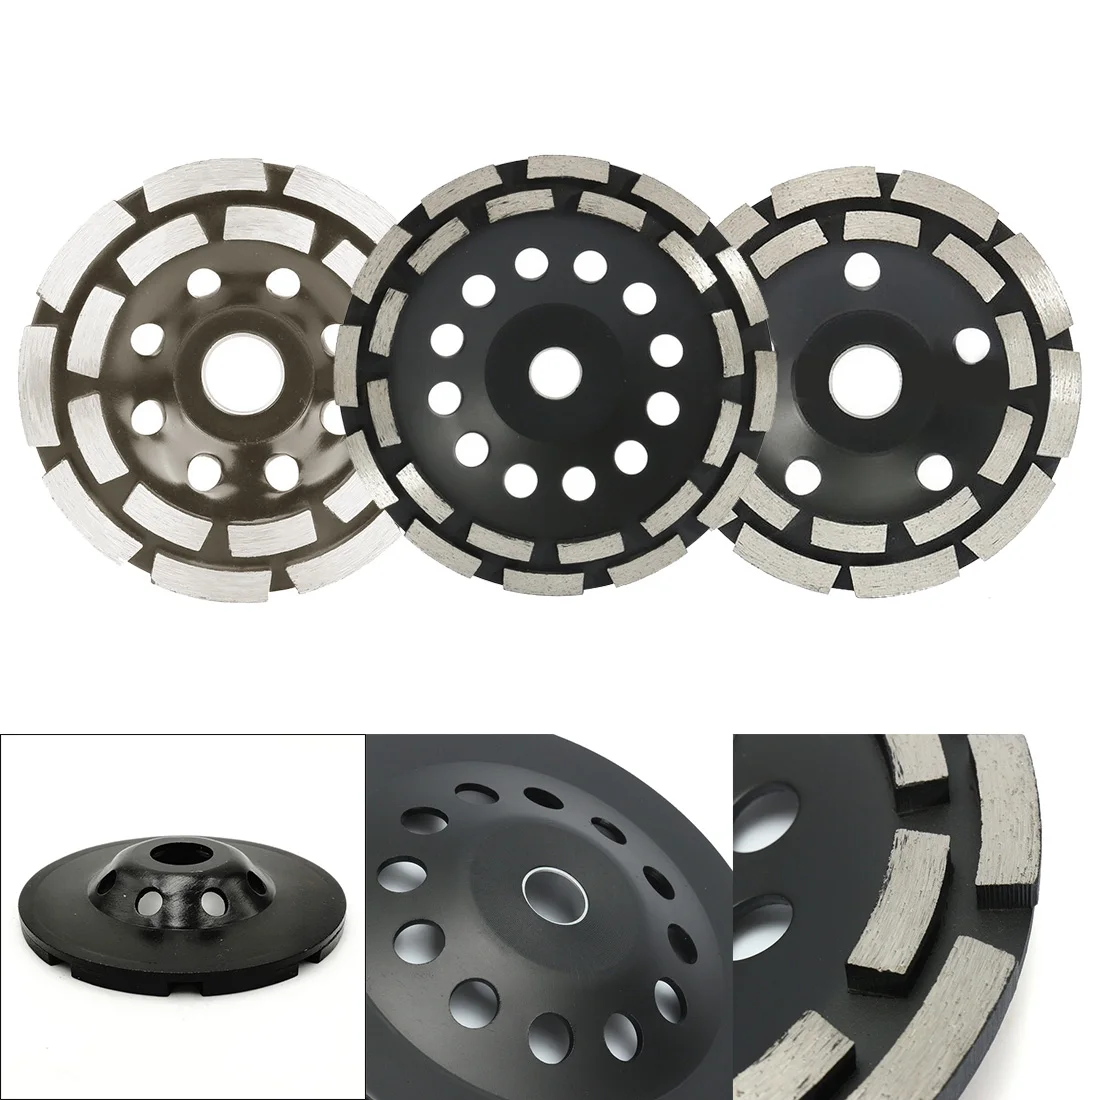 Double Row Grinding Wheel Diamond Disc Abrasives Concrete Tools Grinder Wheel Metalworking Cutting Grinding Wheels Cup Saw Blade